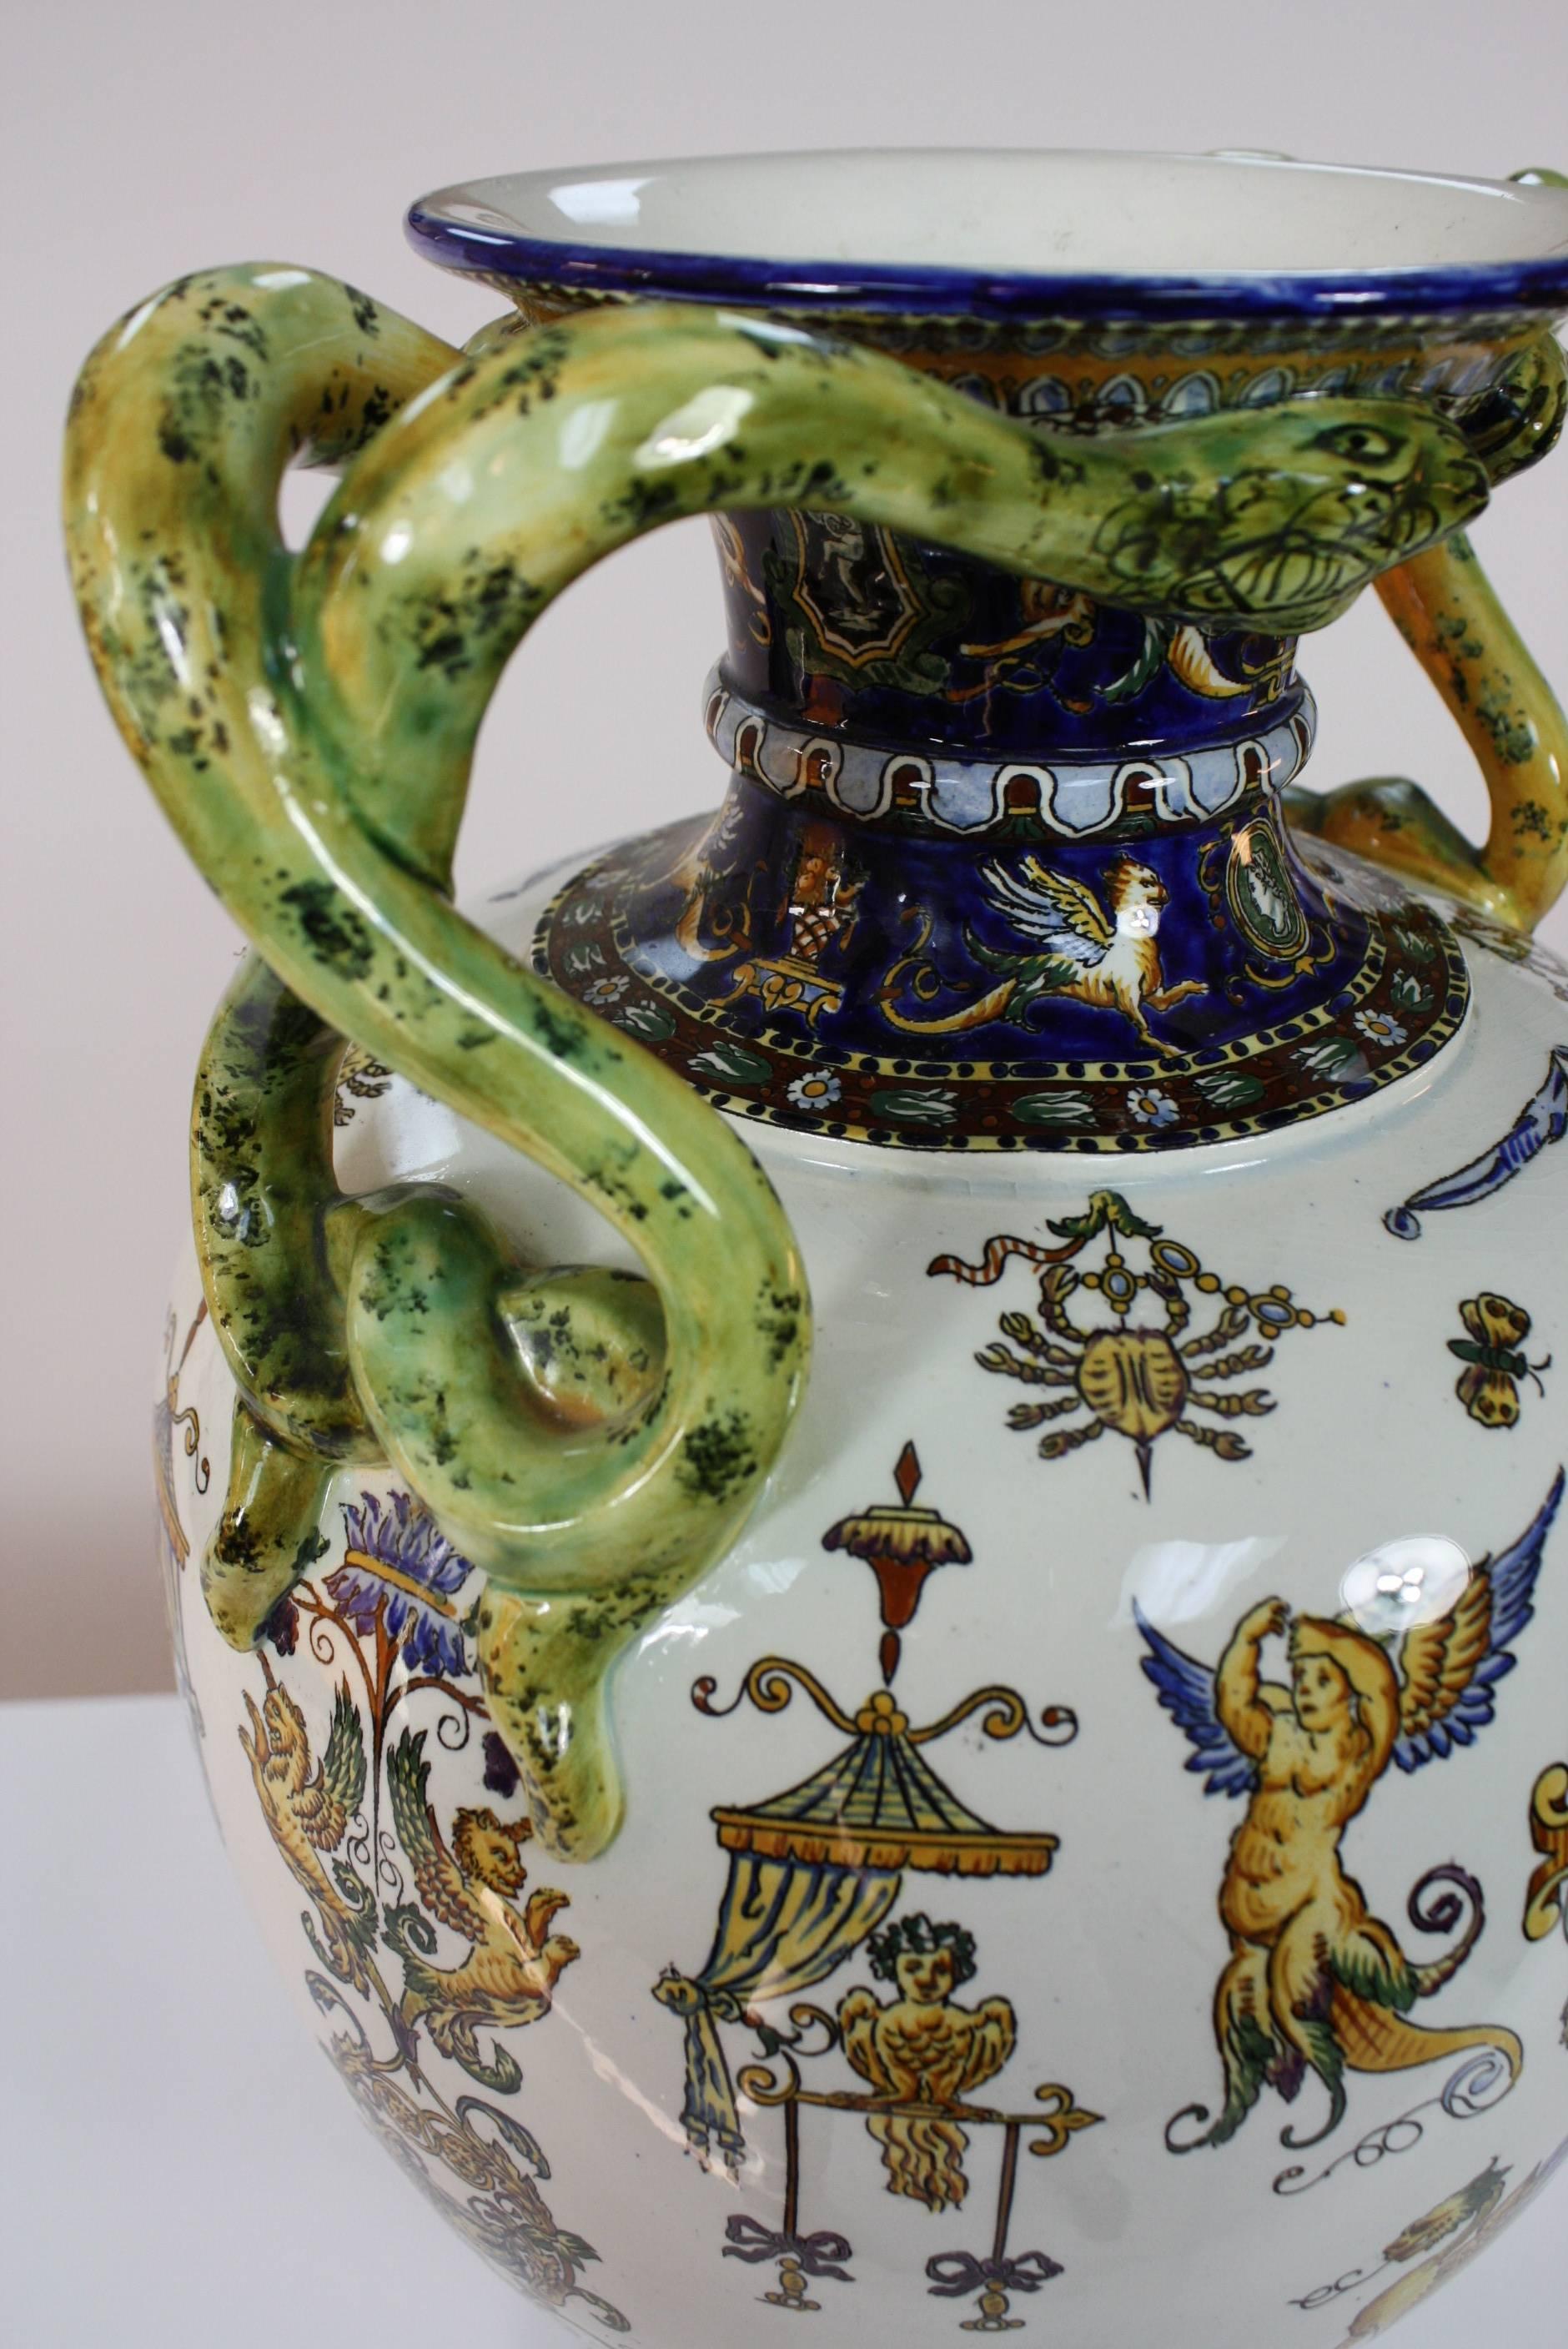 19th Century Large Italian Renaissance Style Faience Vase with Snake Handles by Gien